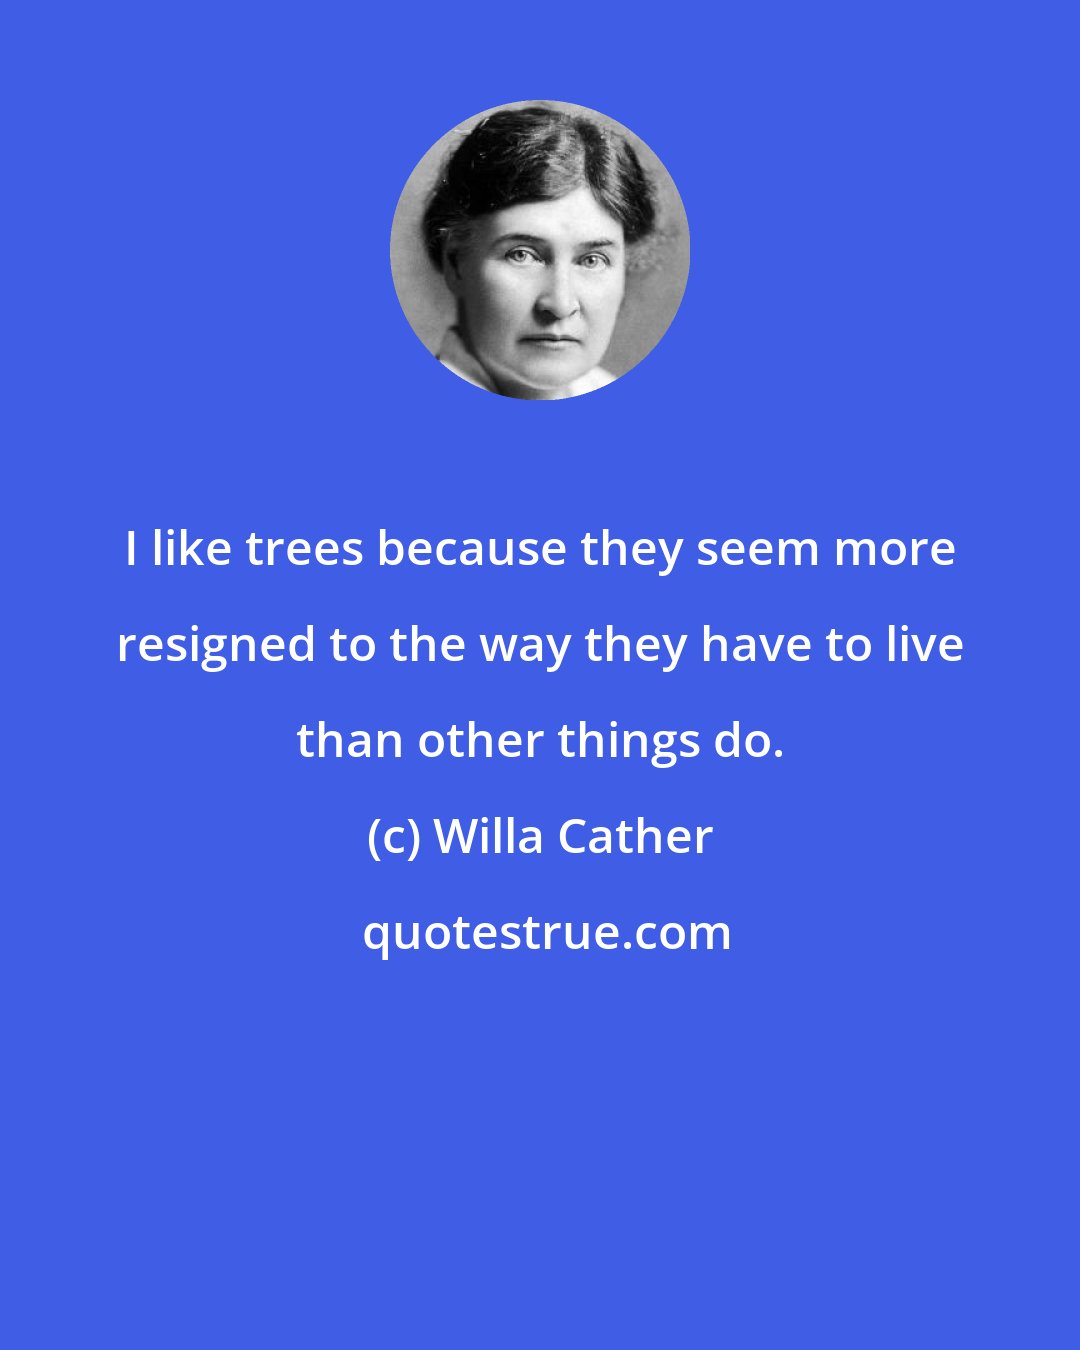 Willa Cather: I like trees because they seem more resigned to the way they have to live than other things do.